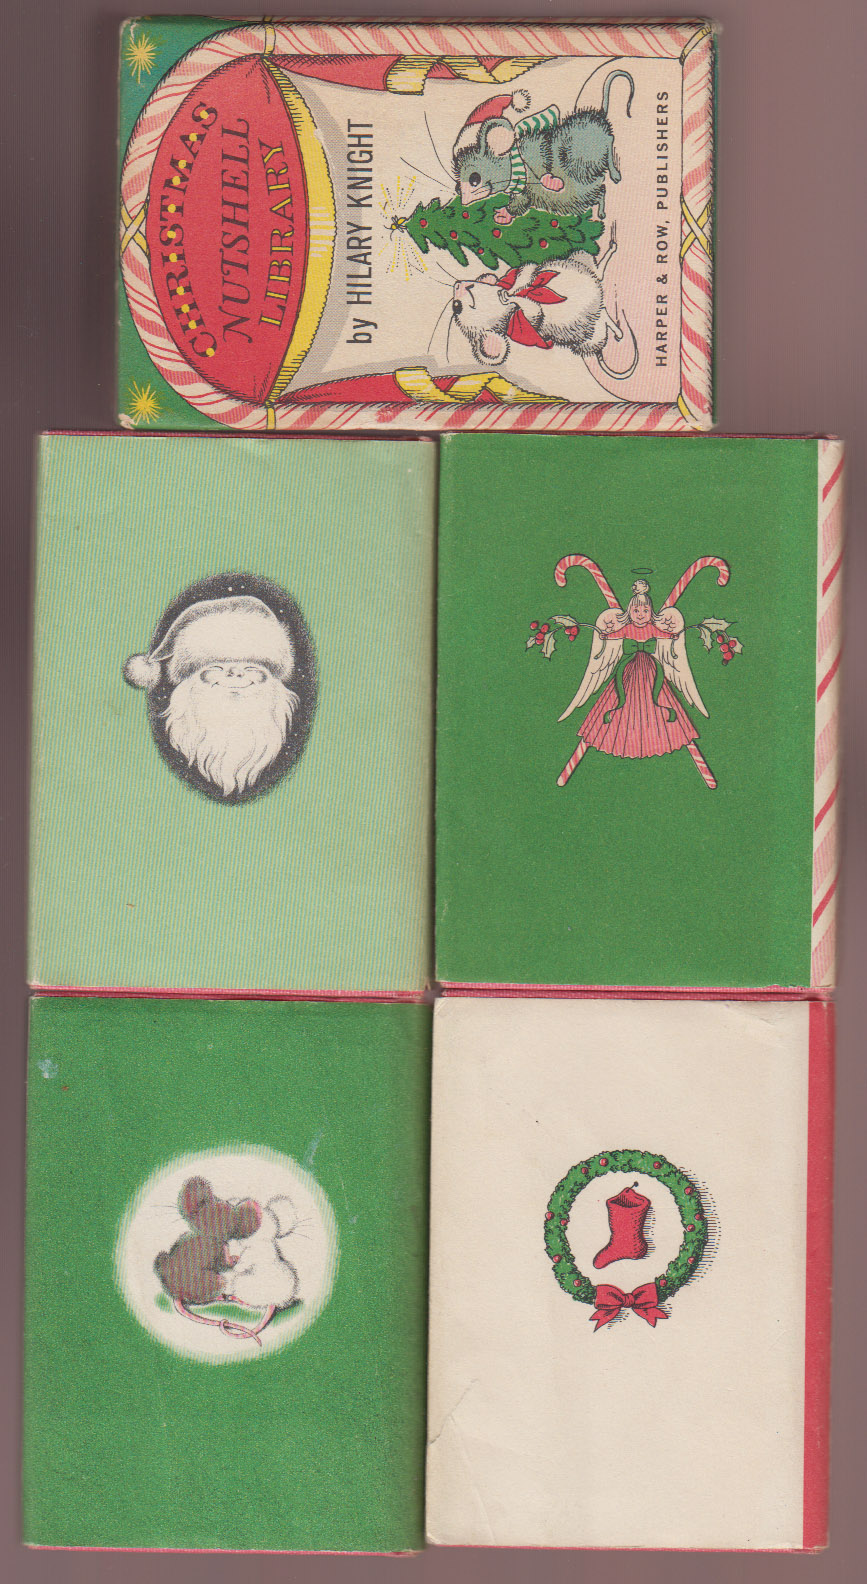 The Christmas Nutshell Library (four Small Books in Box)